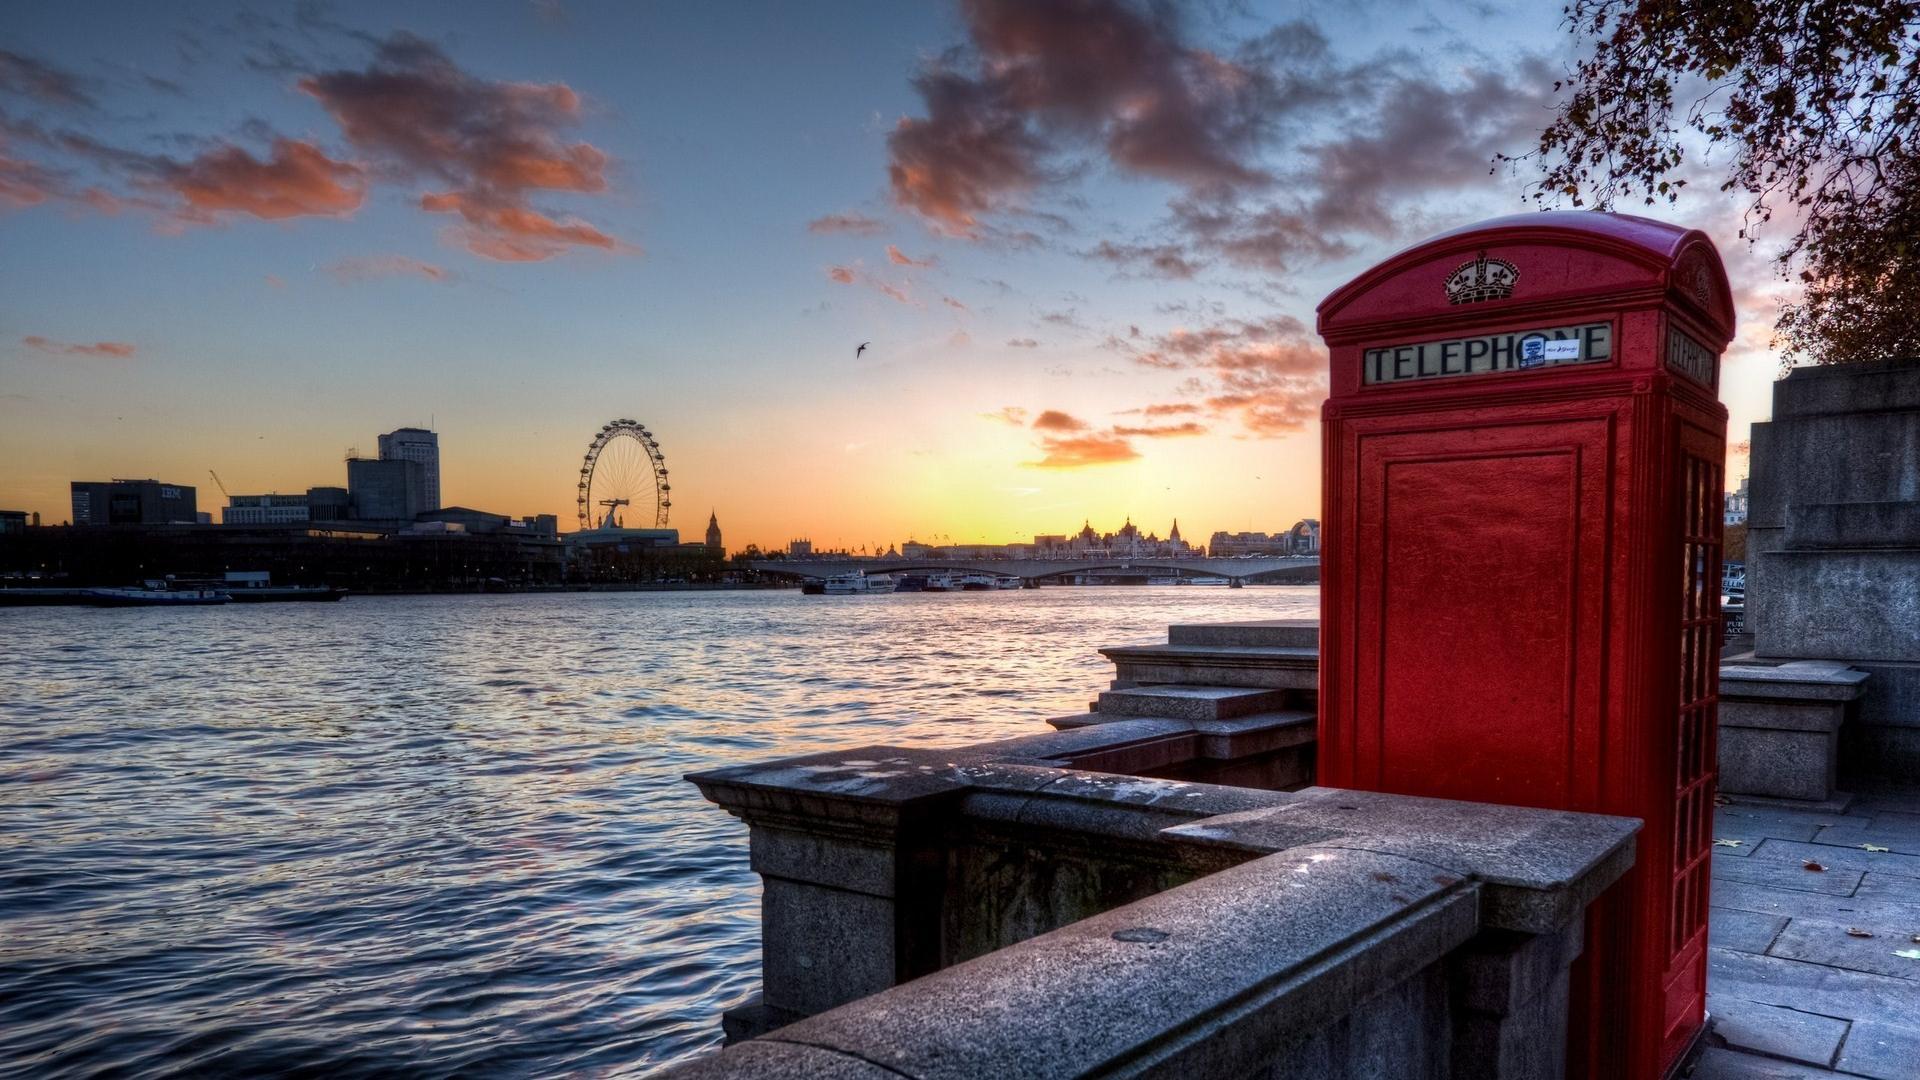 london themed wallpaper,sky,red,water,evening,sunset